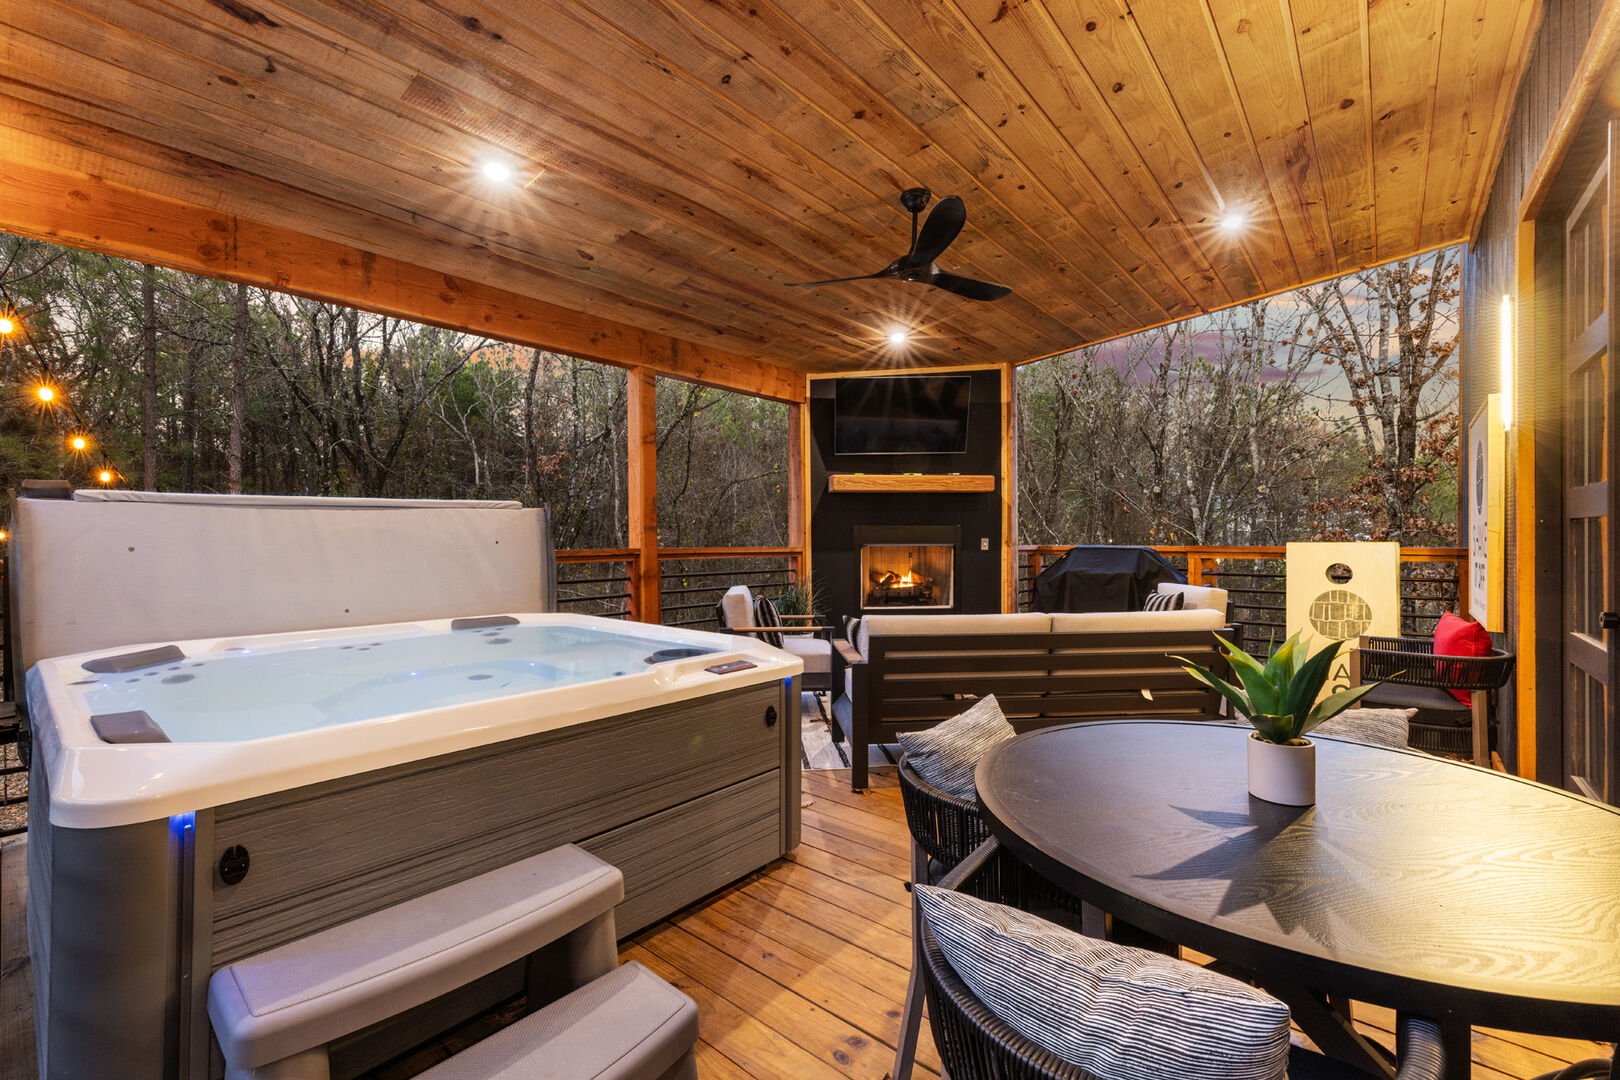 Outdoor patio area includes hot tub, gas fireplace and TV